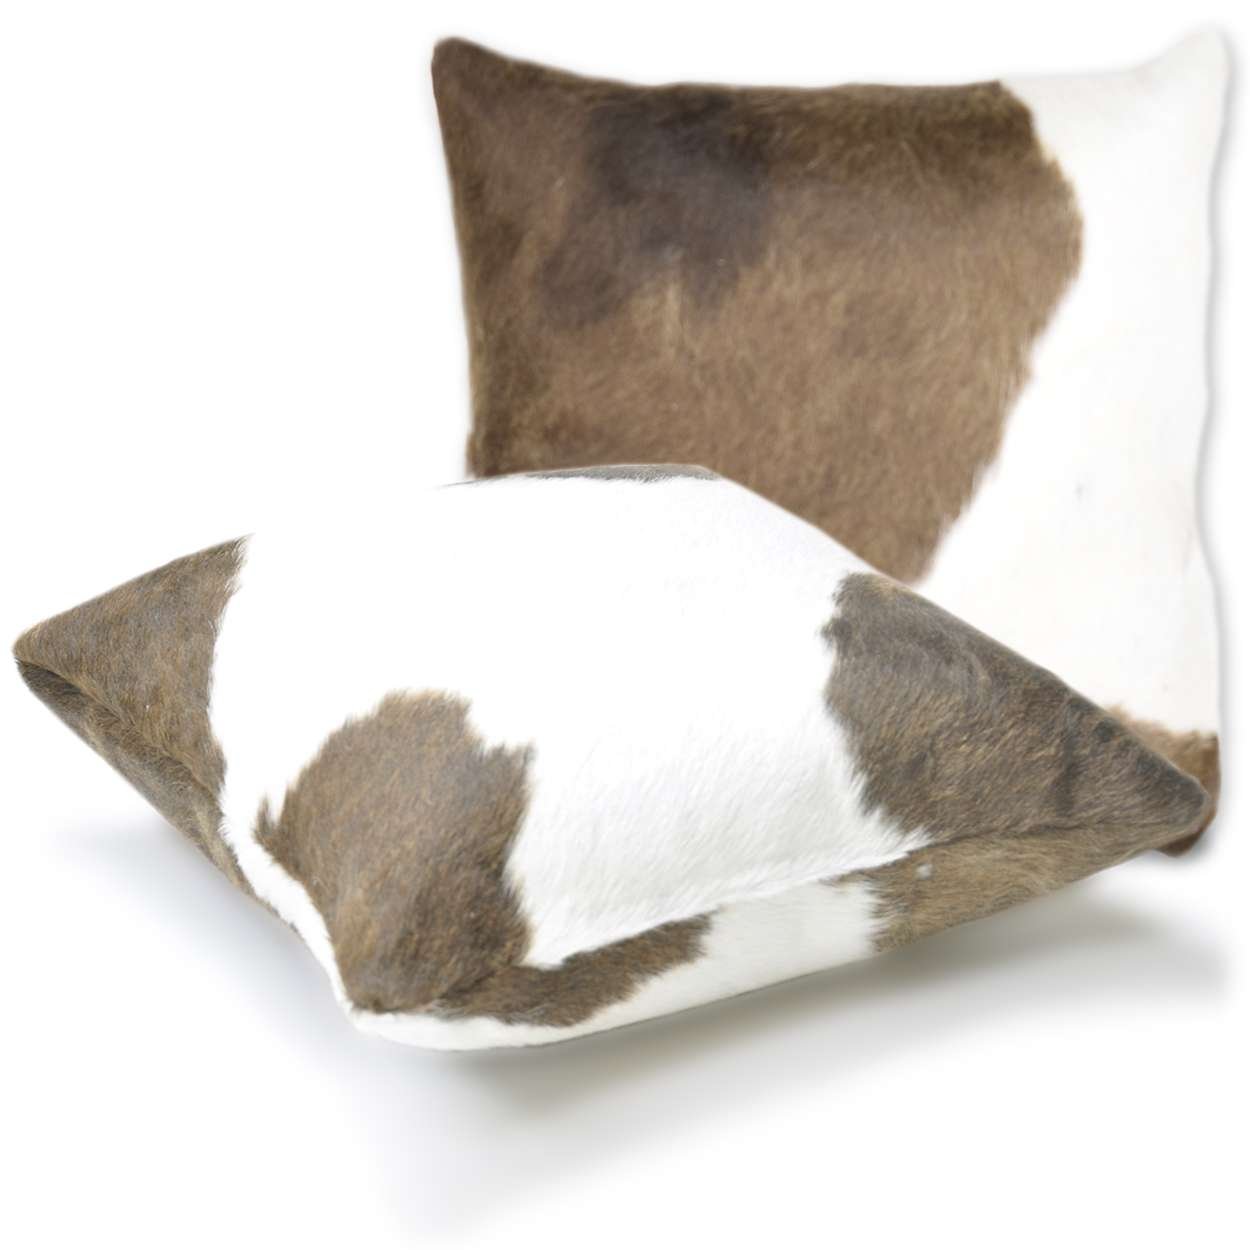 322150 - 15in Premium Cowhide Pillow - Light Chocolate and White on Both Sides